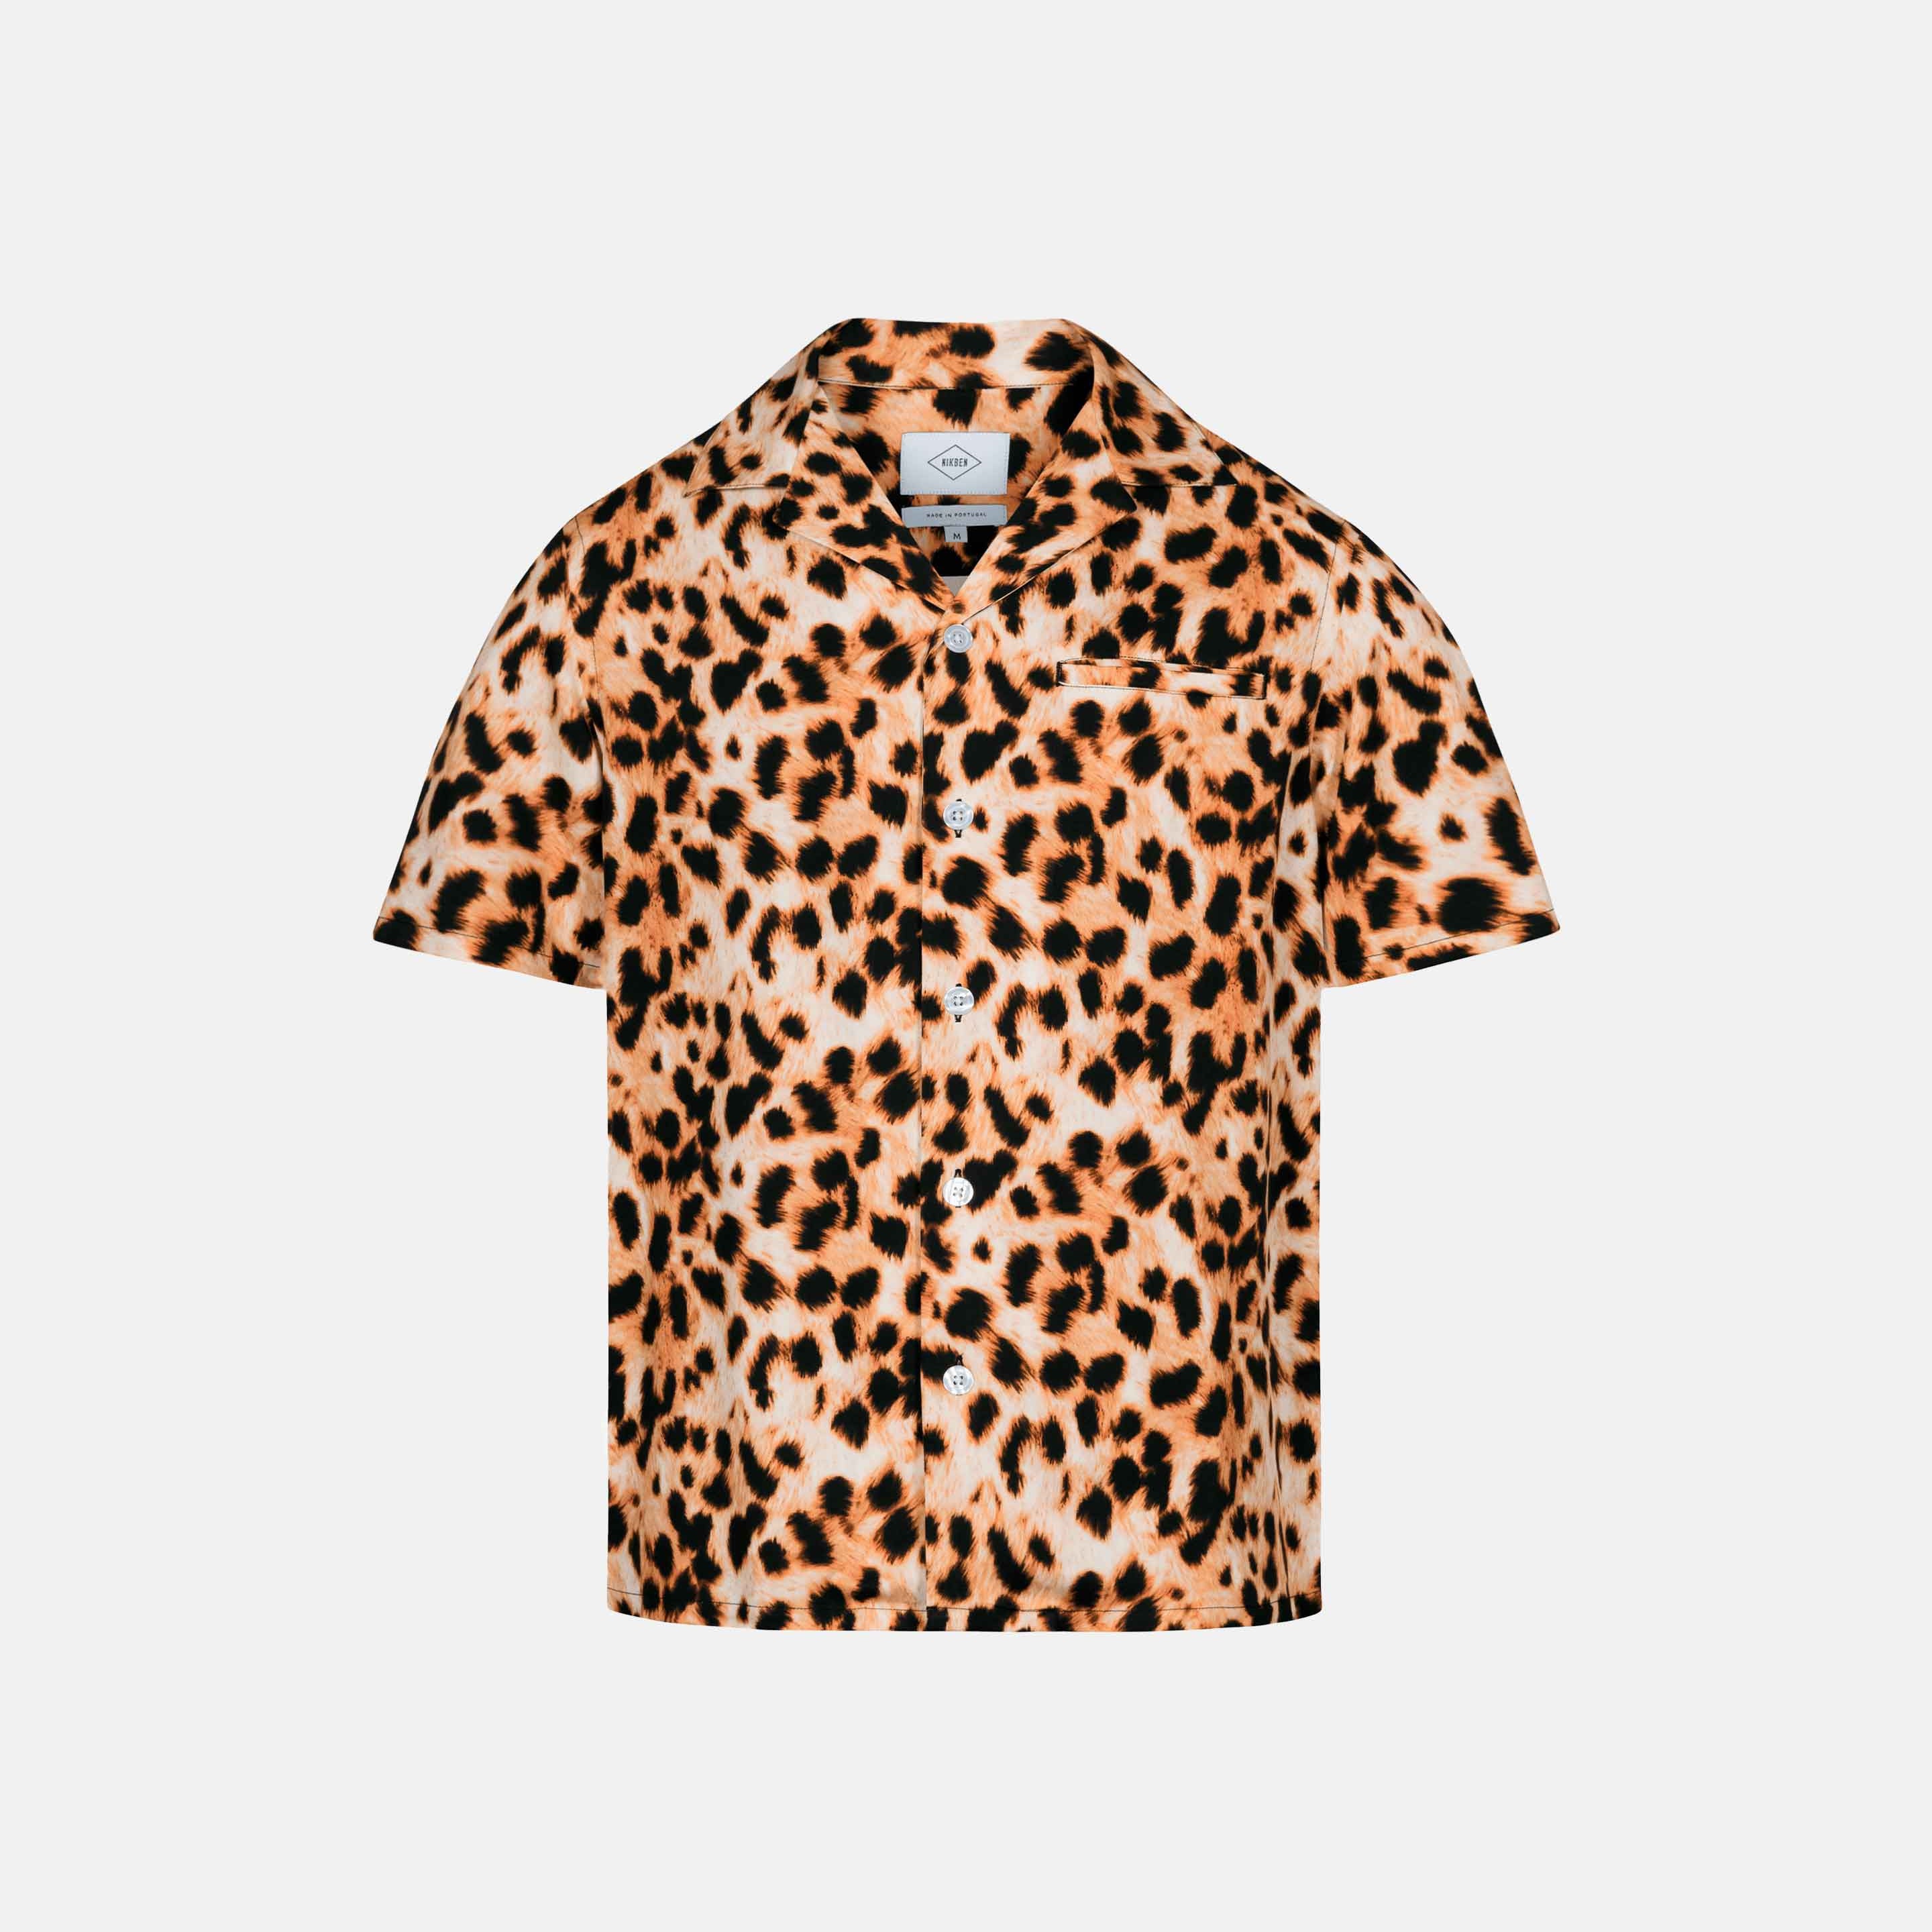 Leopard printed short sleeve vacation shirt with white pearl buttons